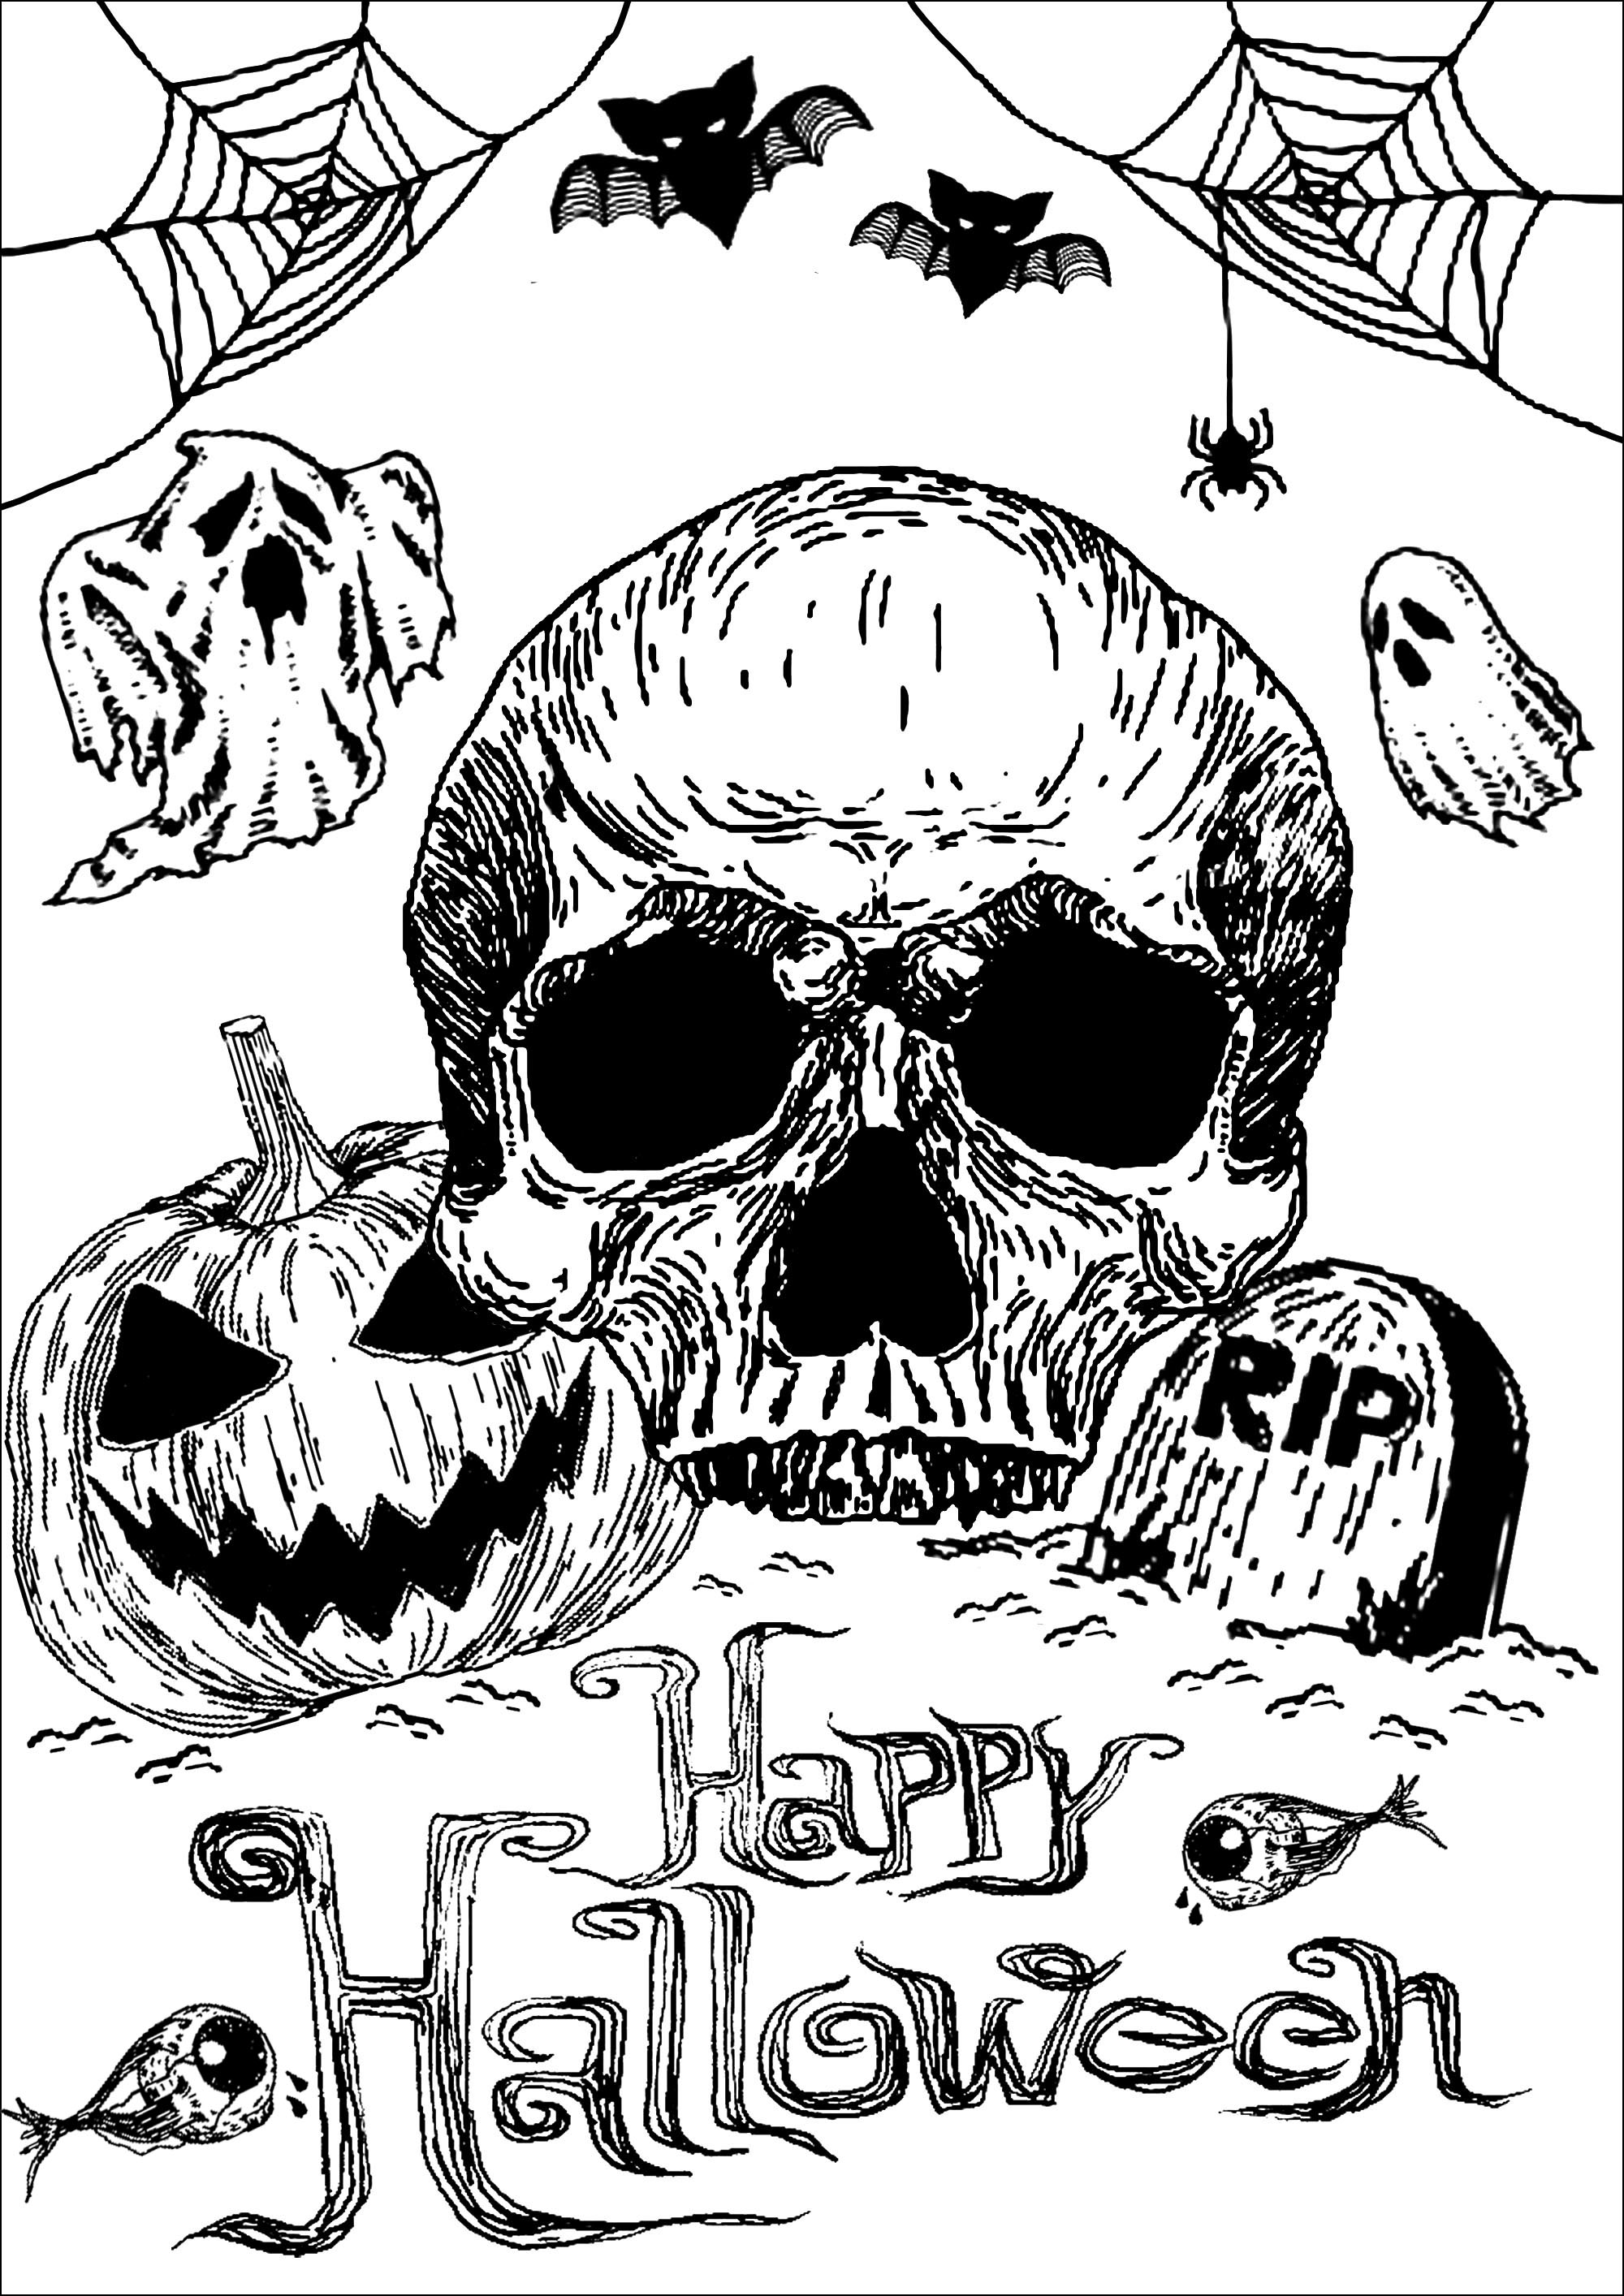 Color for Halloween this skull, this pumpkin and this grave ... accompanied by pretty ghosts, bats, cobwebs ...